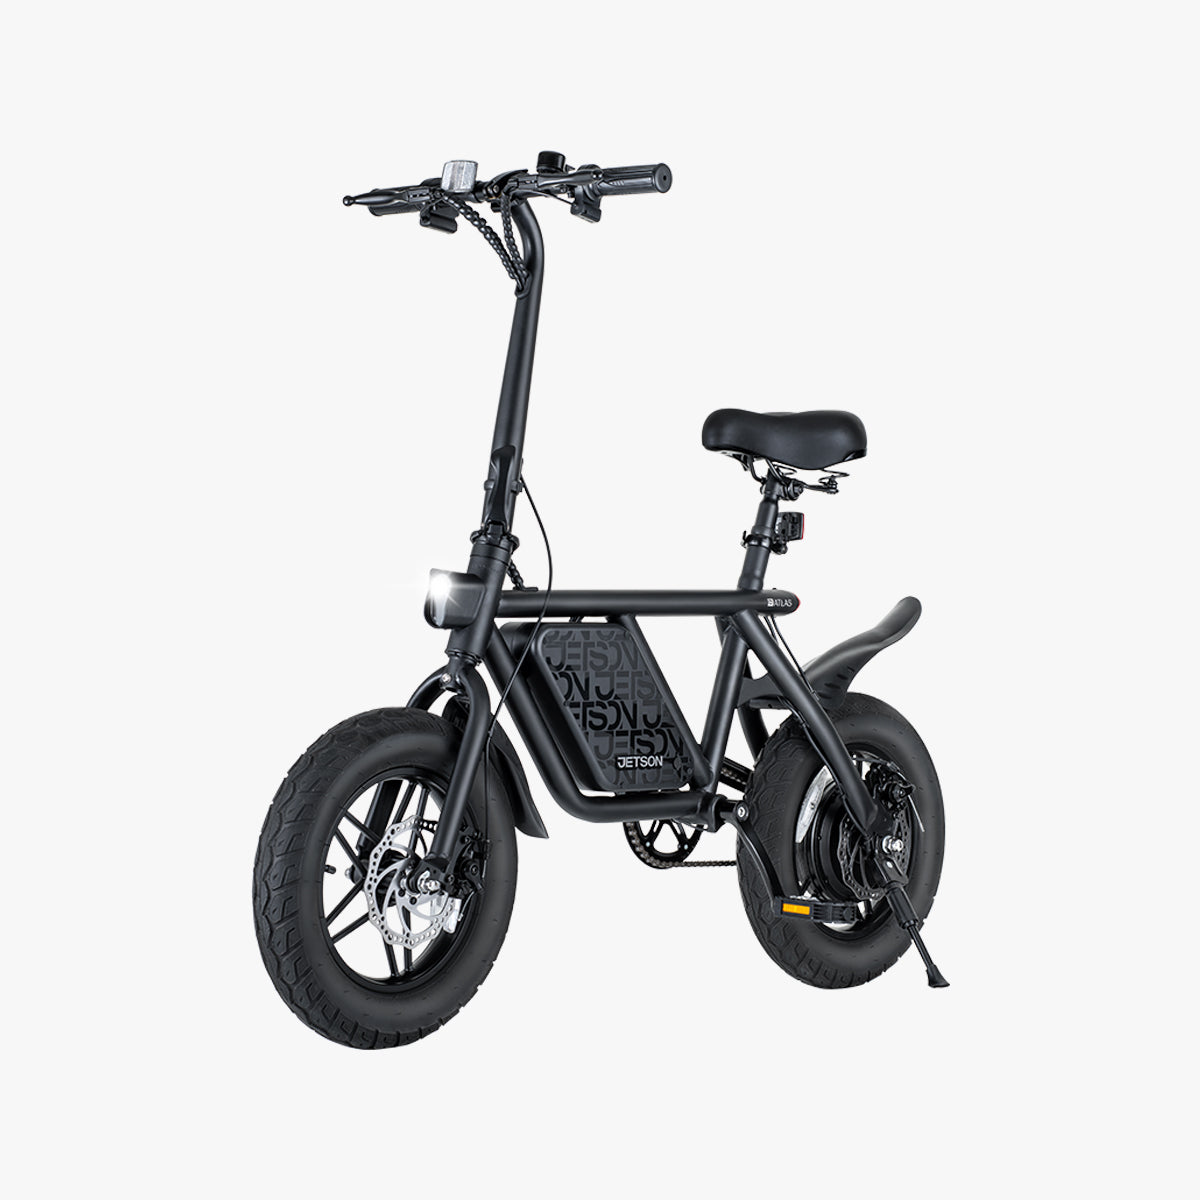 the Atlas e-bike angled to the left with the kickstand down 